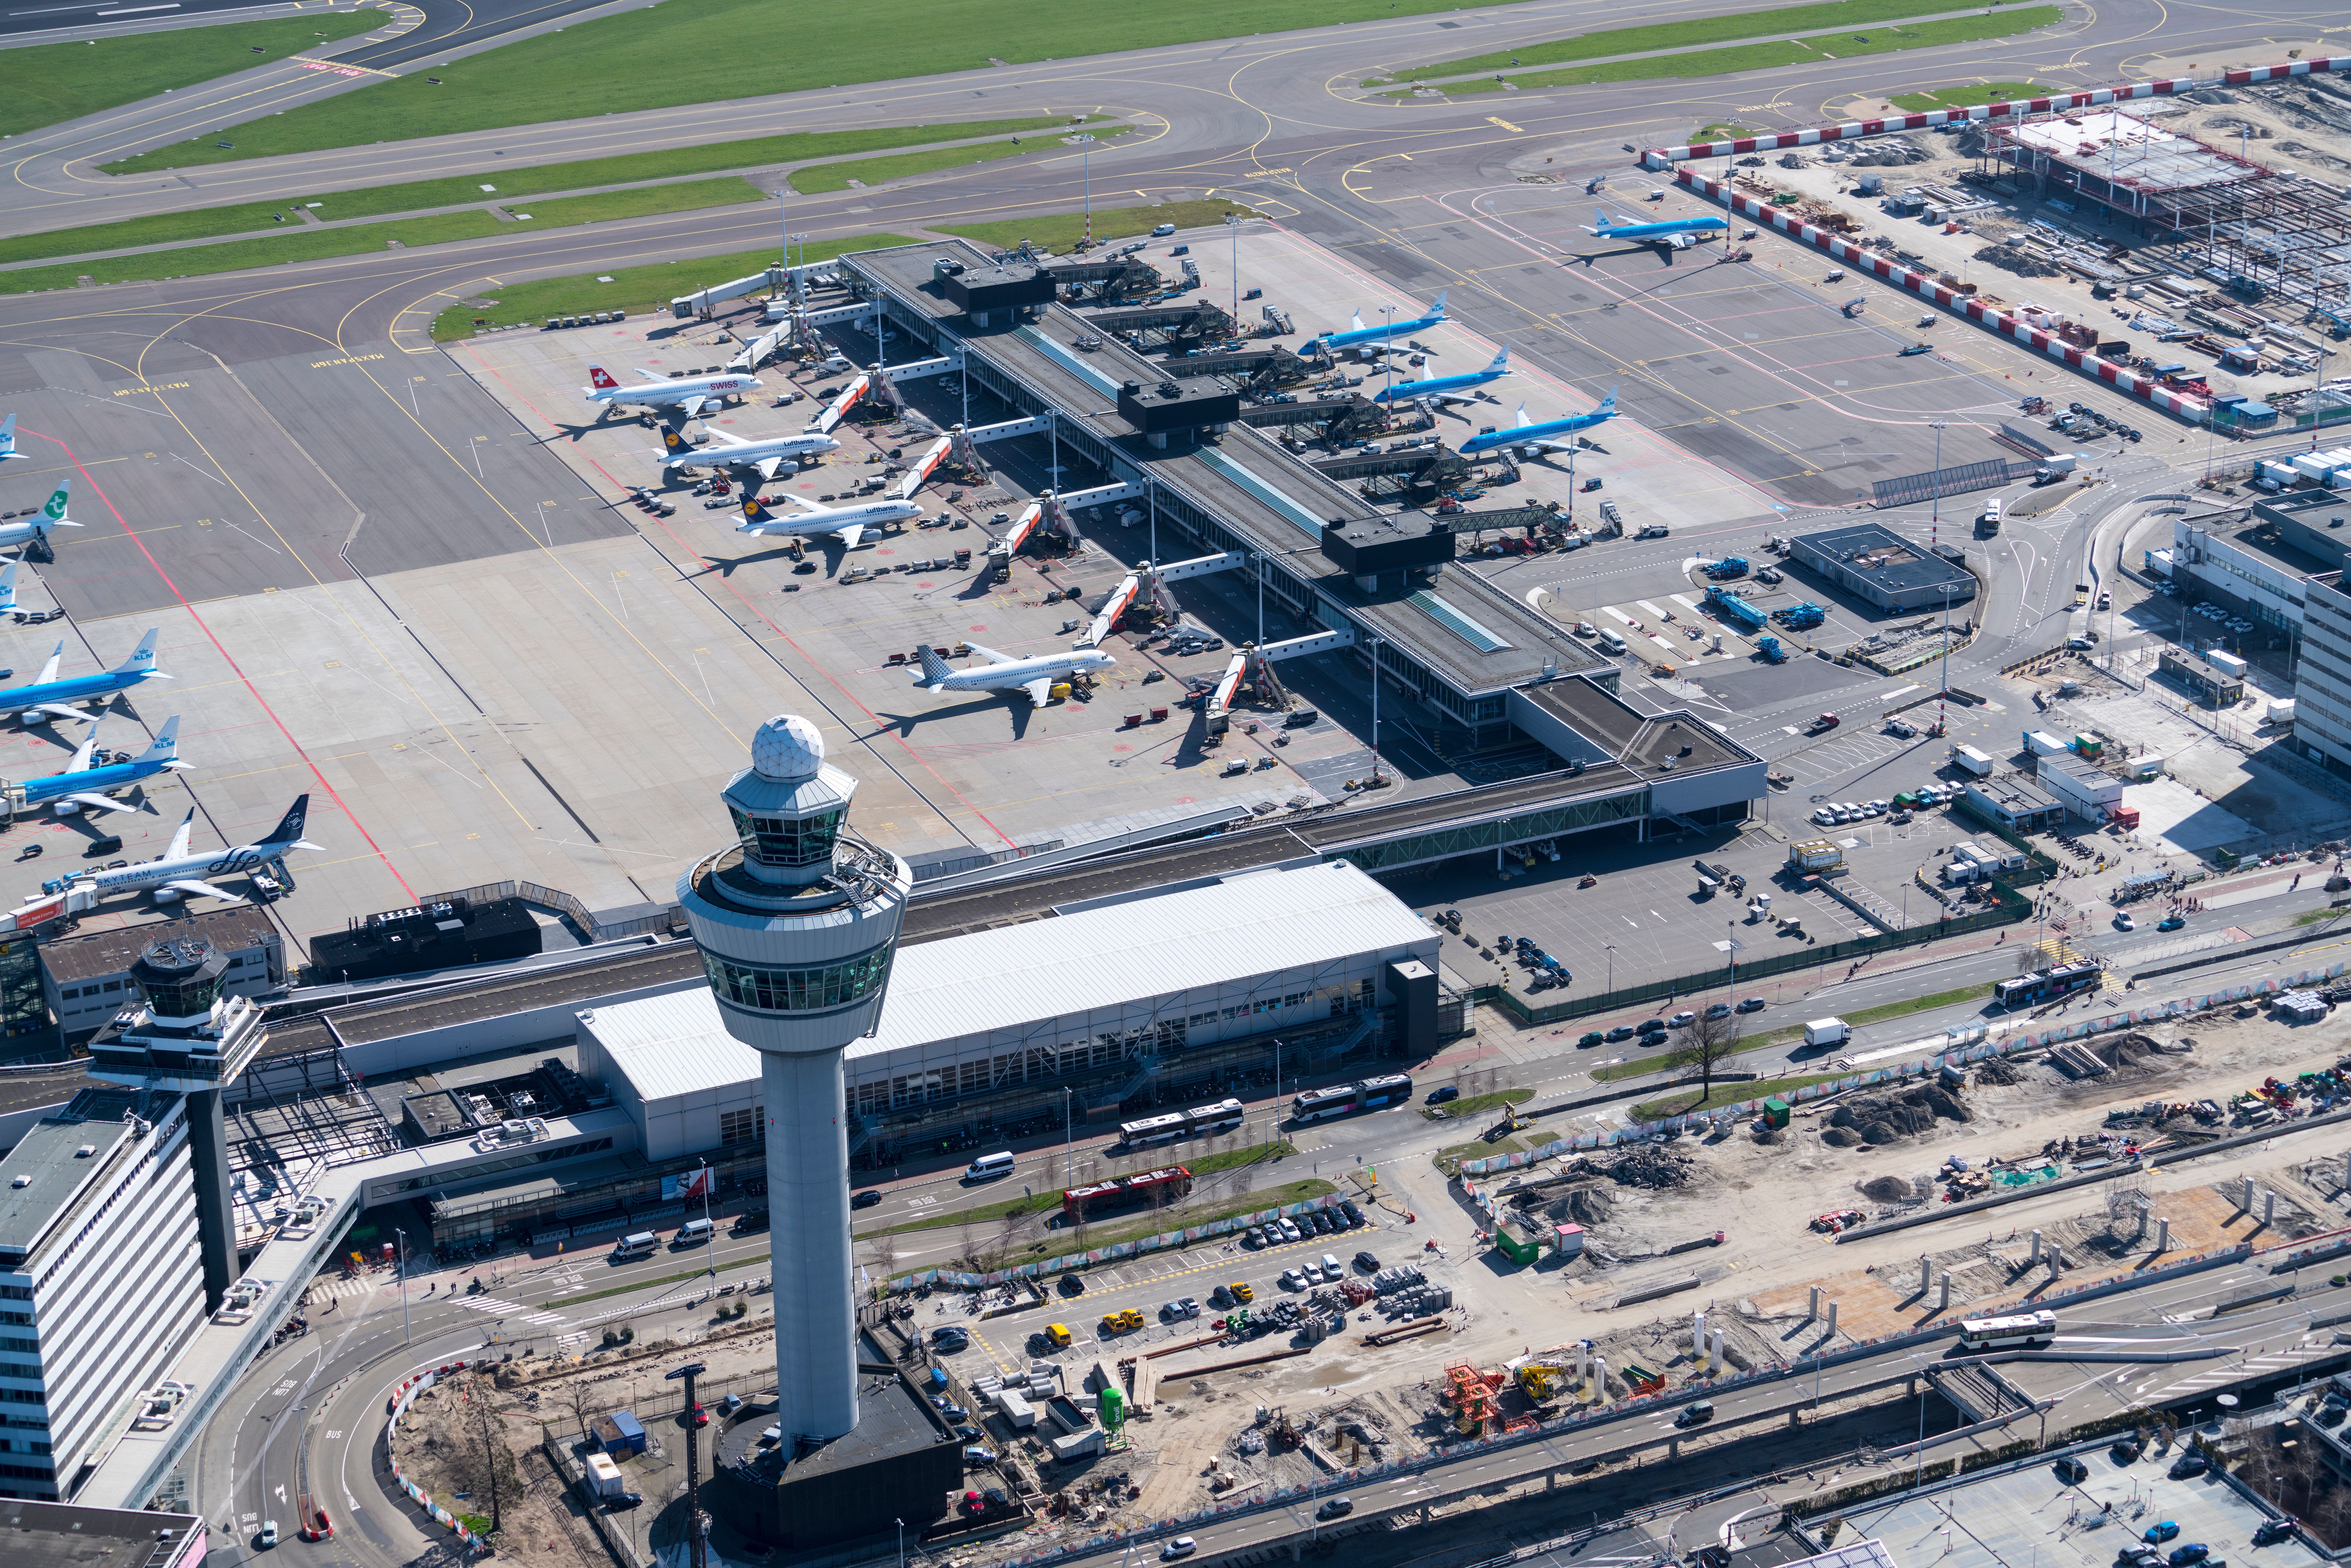 A bird's eye view of Amsterdam Schiphol Airport (AMS).